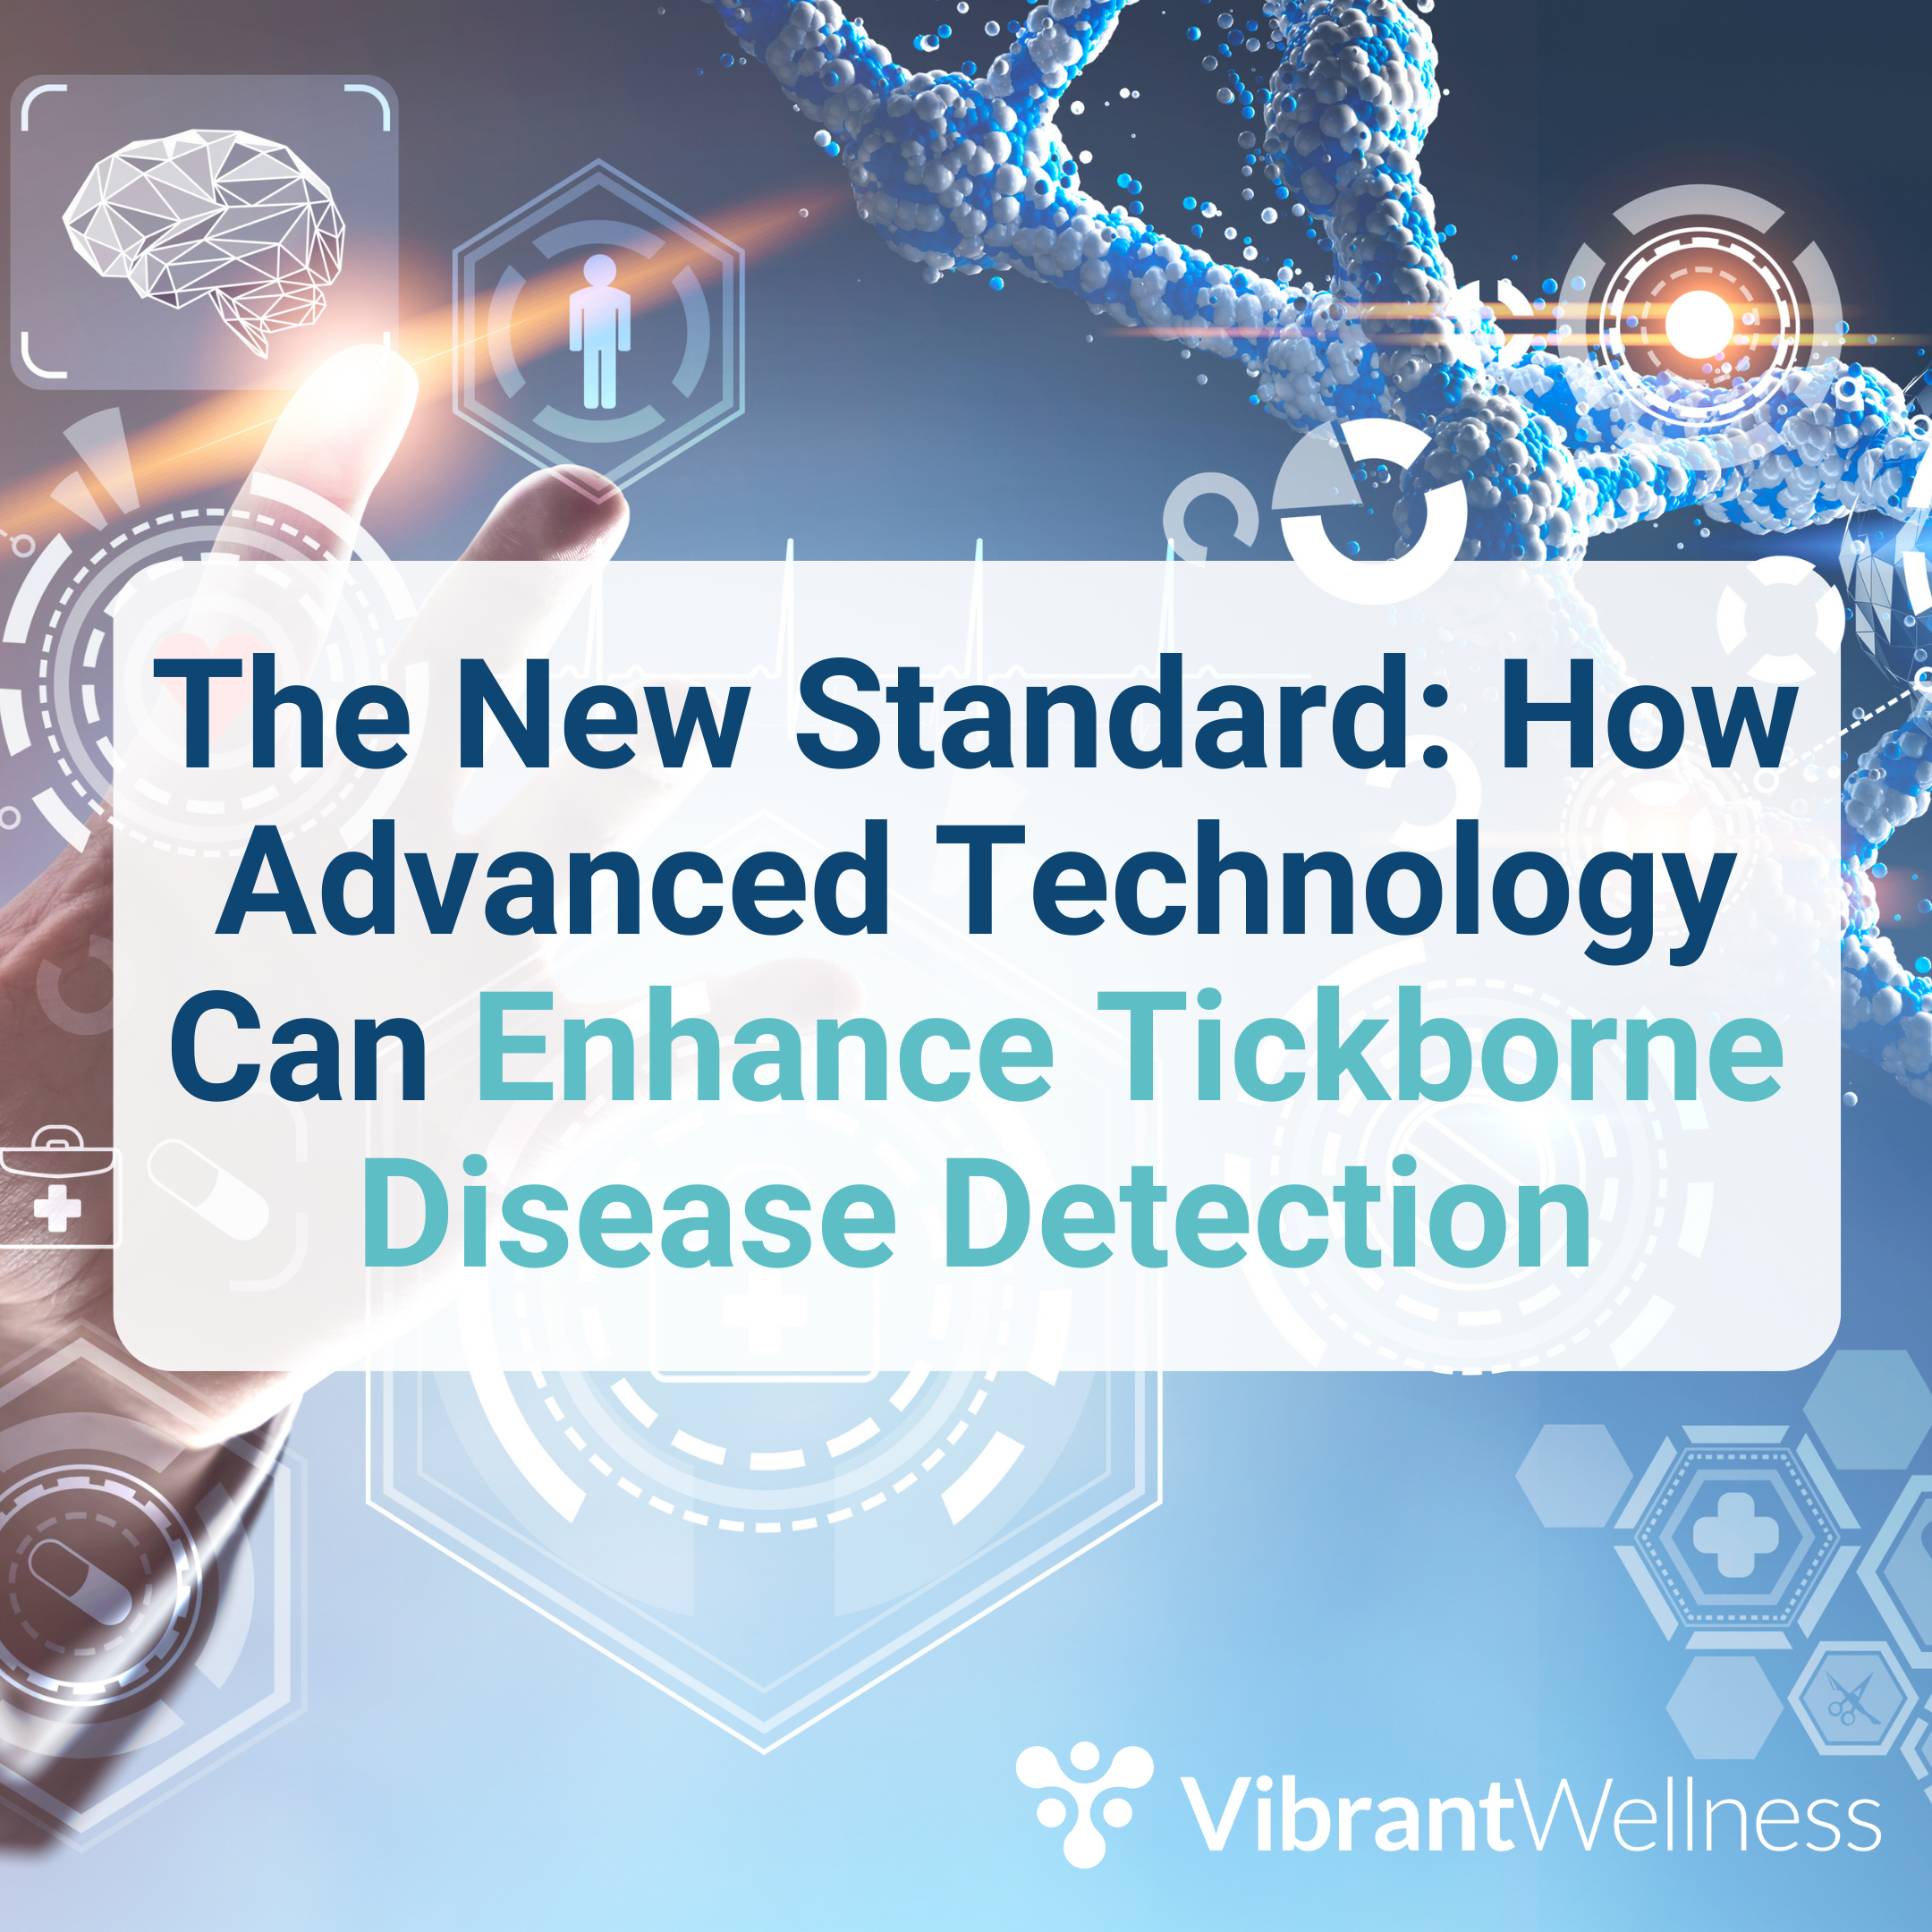 The New Standard: How Advanced Technology Can Enhance Tickborne Disease Detection